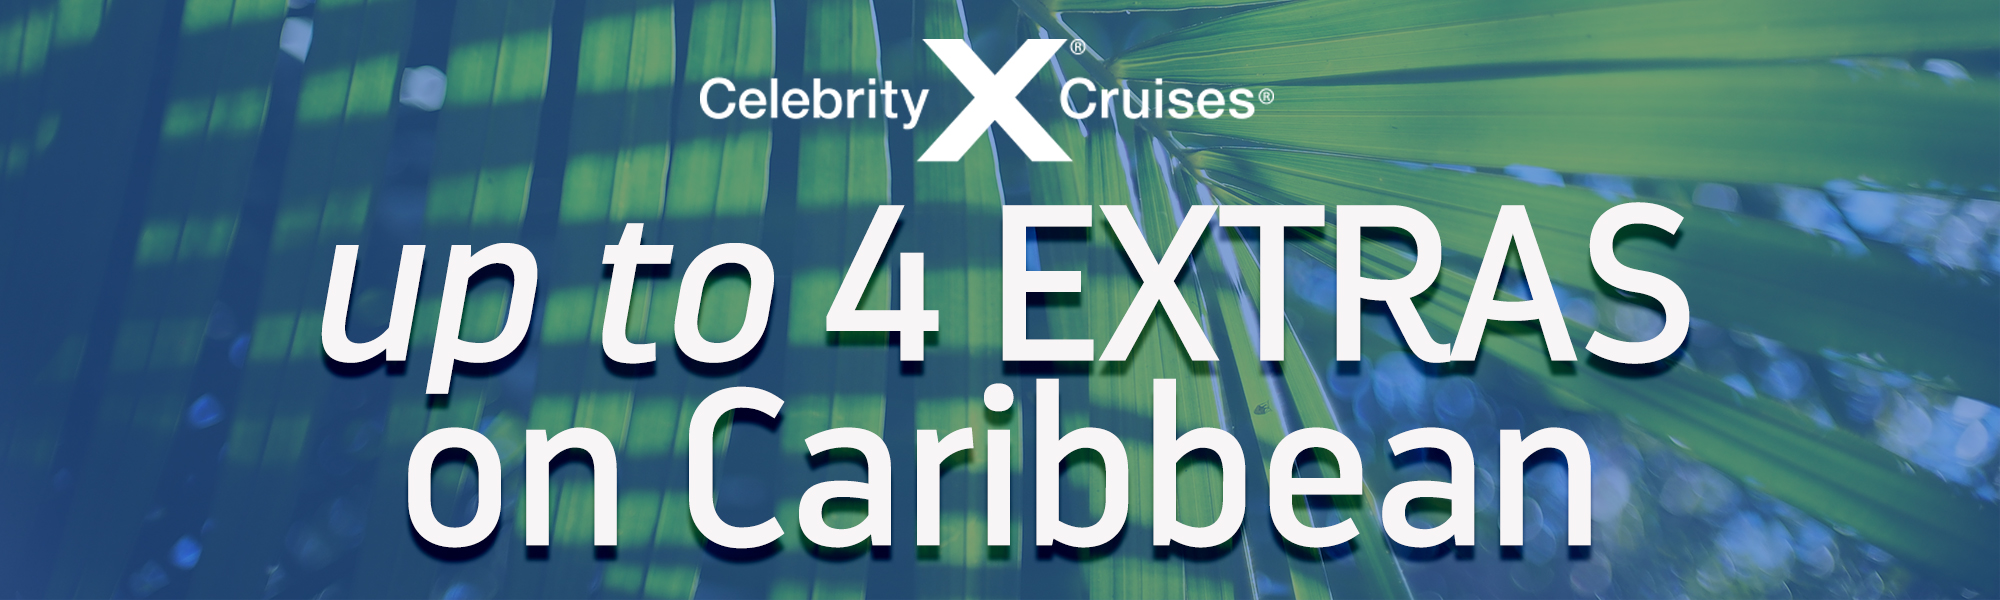 Celebrity Caribbean with up to 4 Extras